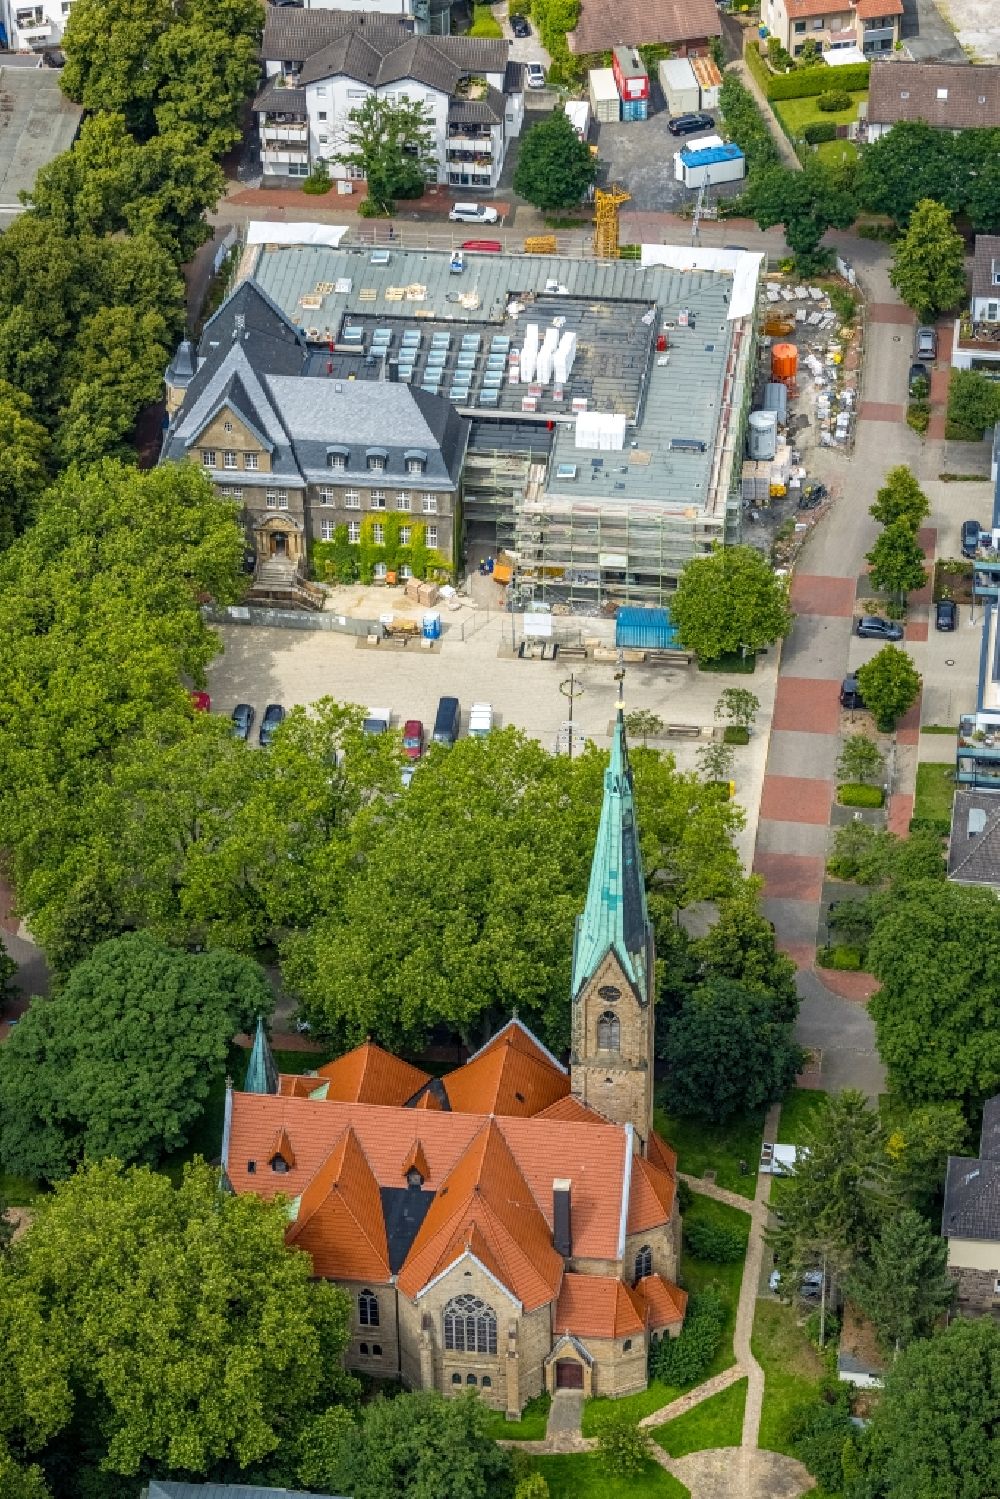 Holzwickede from above - Construction site of Town Hall building of the city administration as a building extension Am Markt - Poststrasse in the district Brackel in Holzwickede at Ruhrgebiet in the state North Rhine-Westphalia, Germany